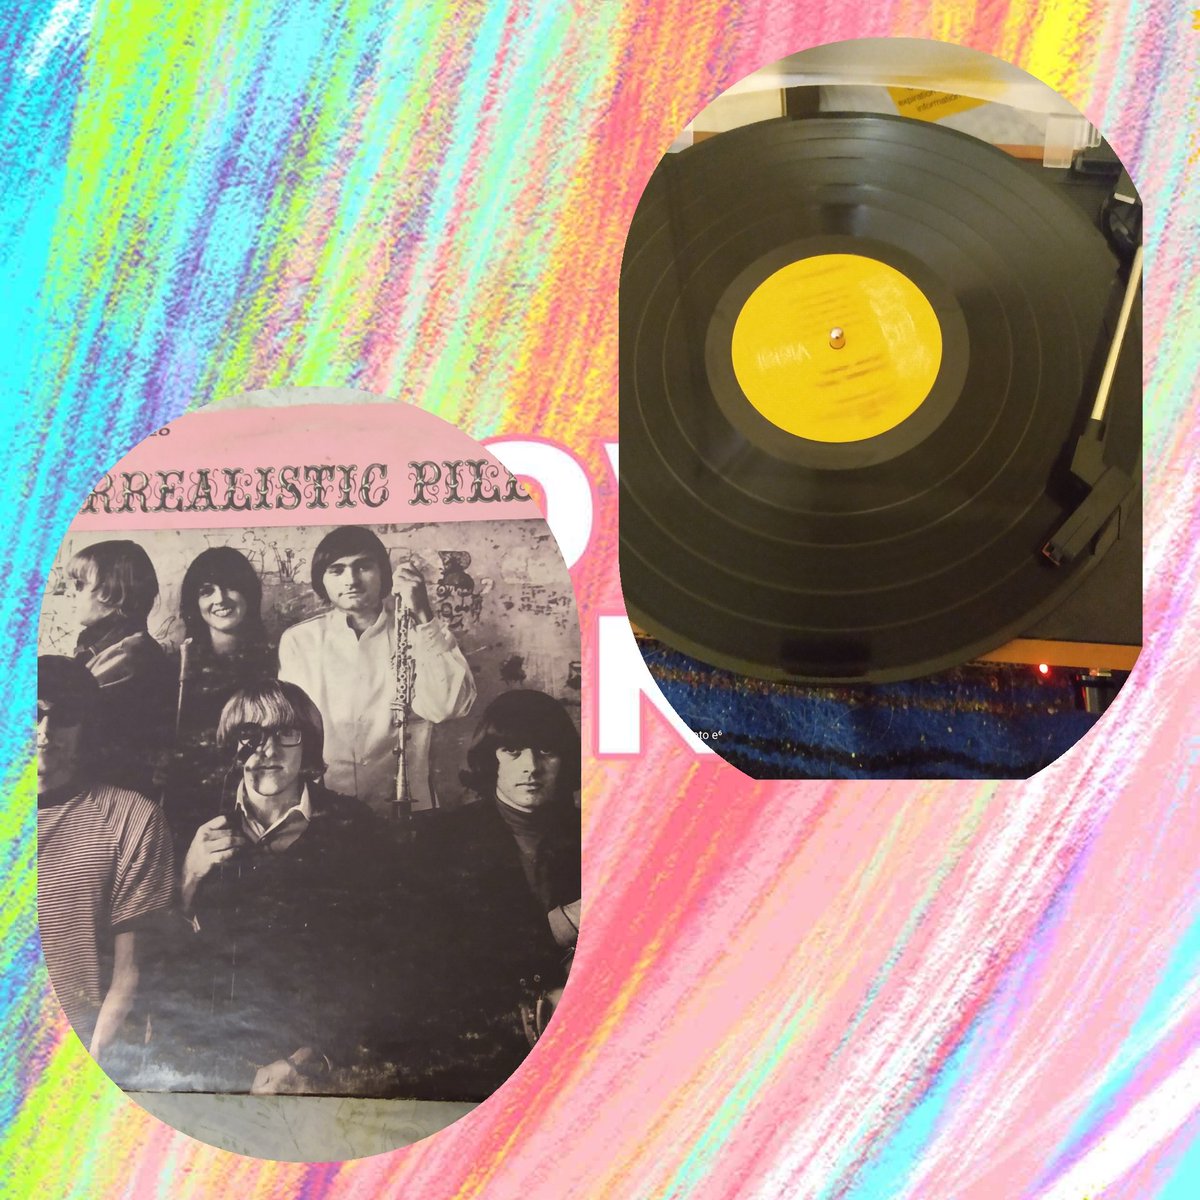 #vinylrecords 
#jeffersonstarship
#music
Checking out listening to #music
Found by dumpster 1967 Jefferson starship album called realistic pillow